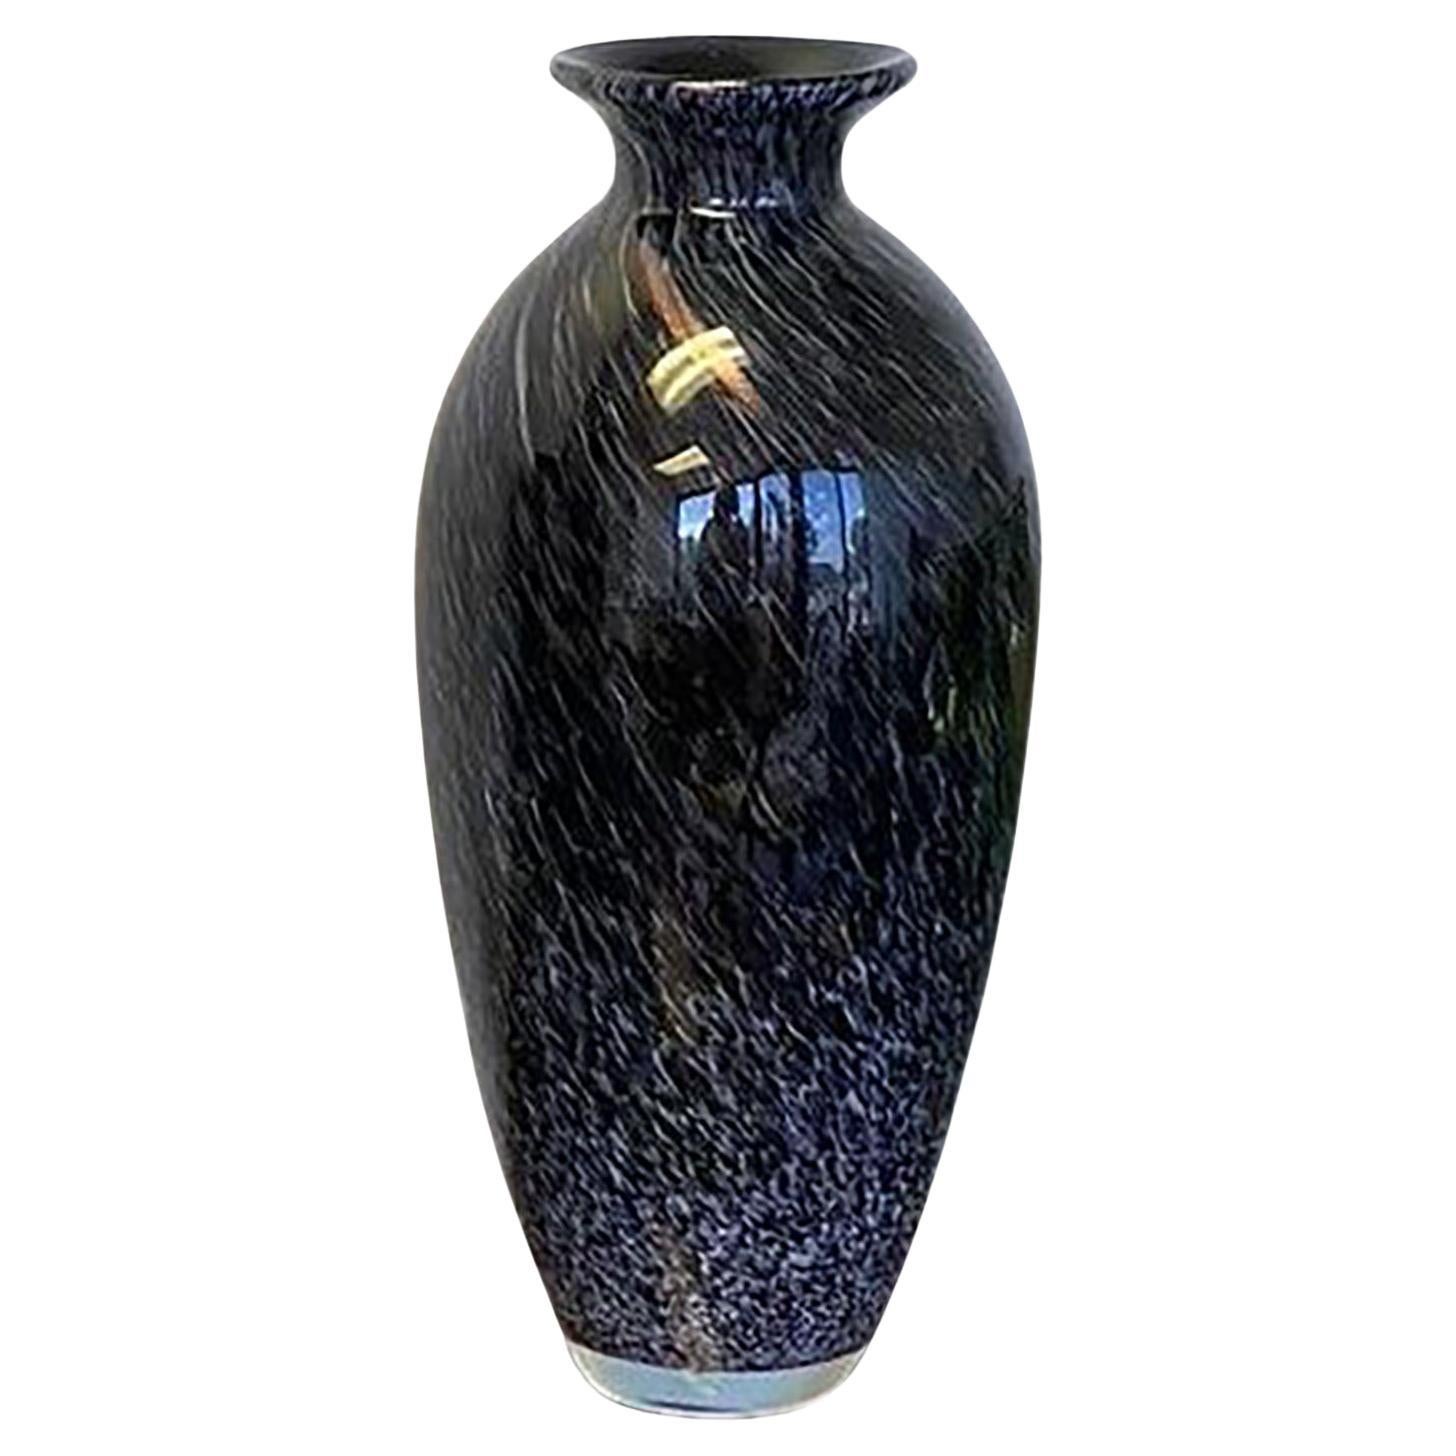 Murano Black Silver and Gold Art Glass Vase For Sale